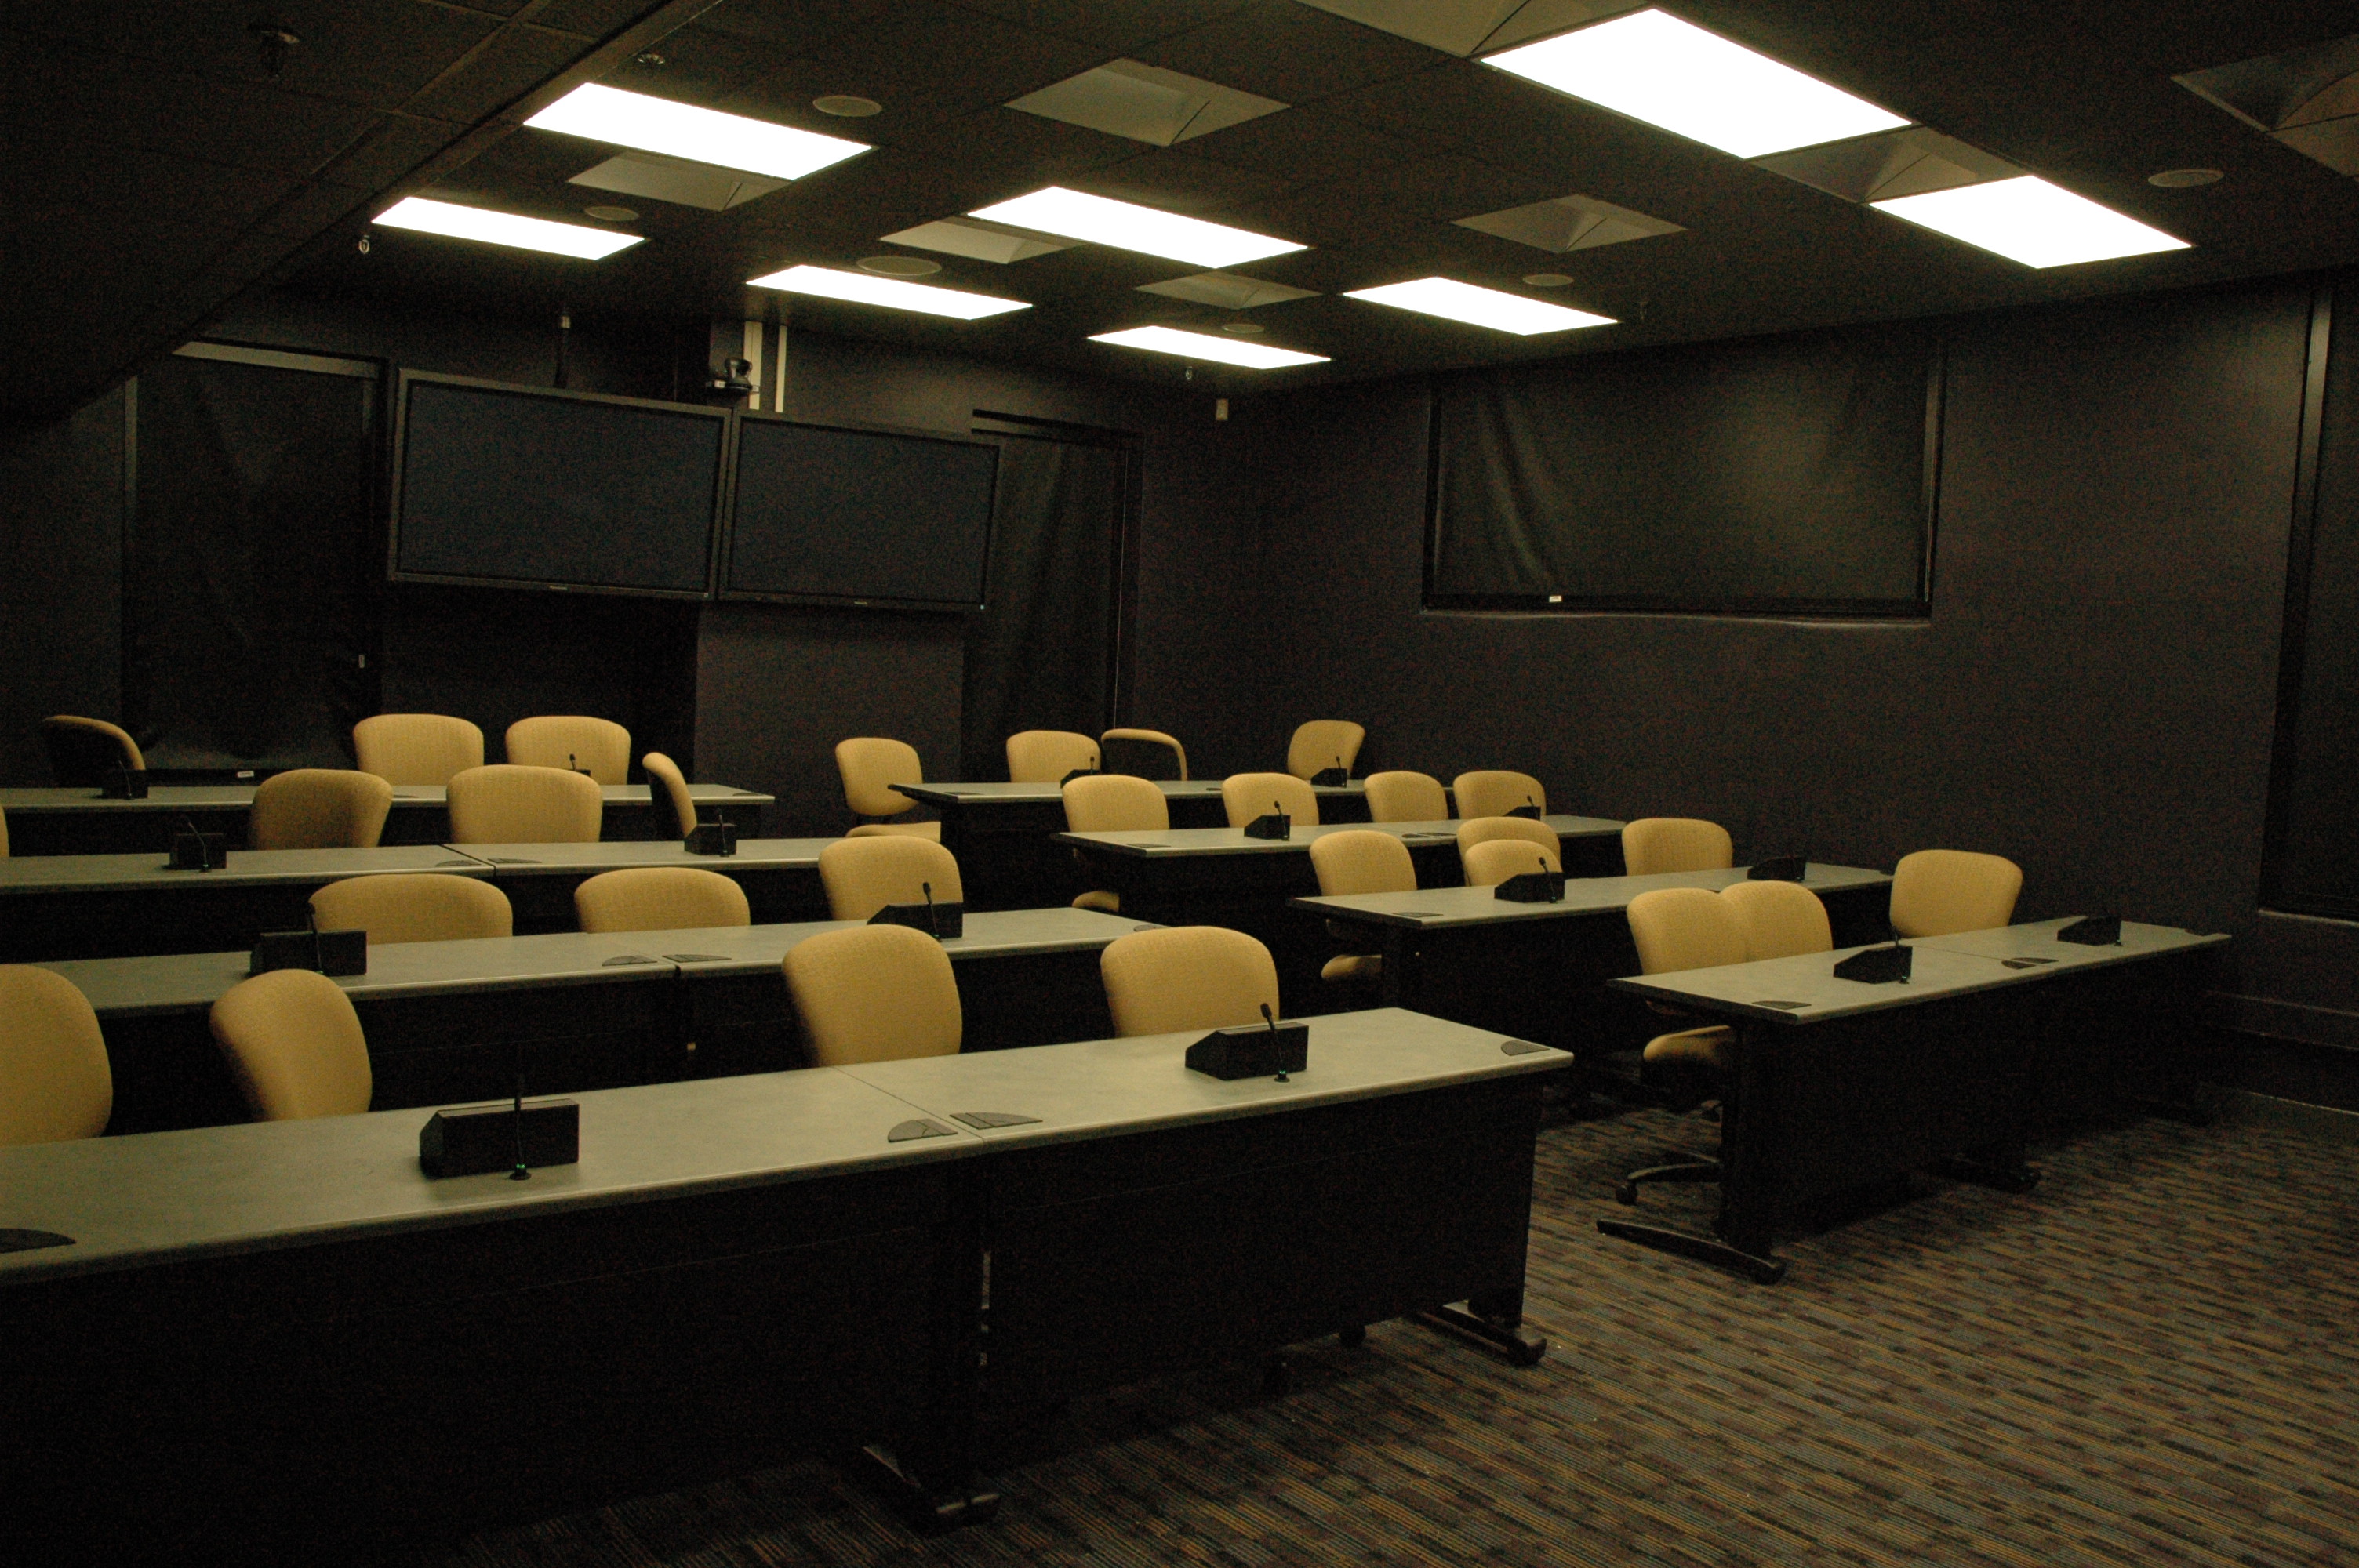 View 1 of Video conference room, Coates 202.